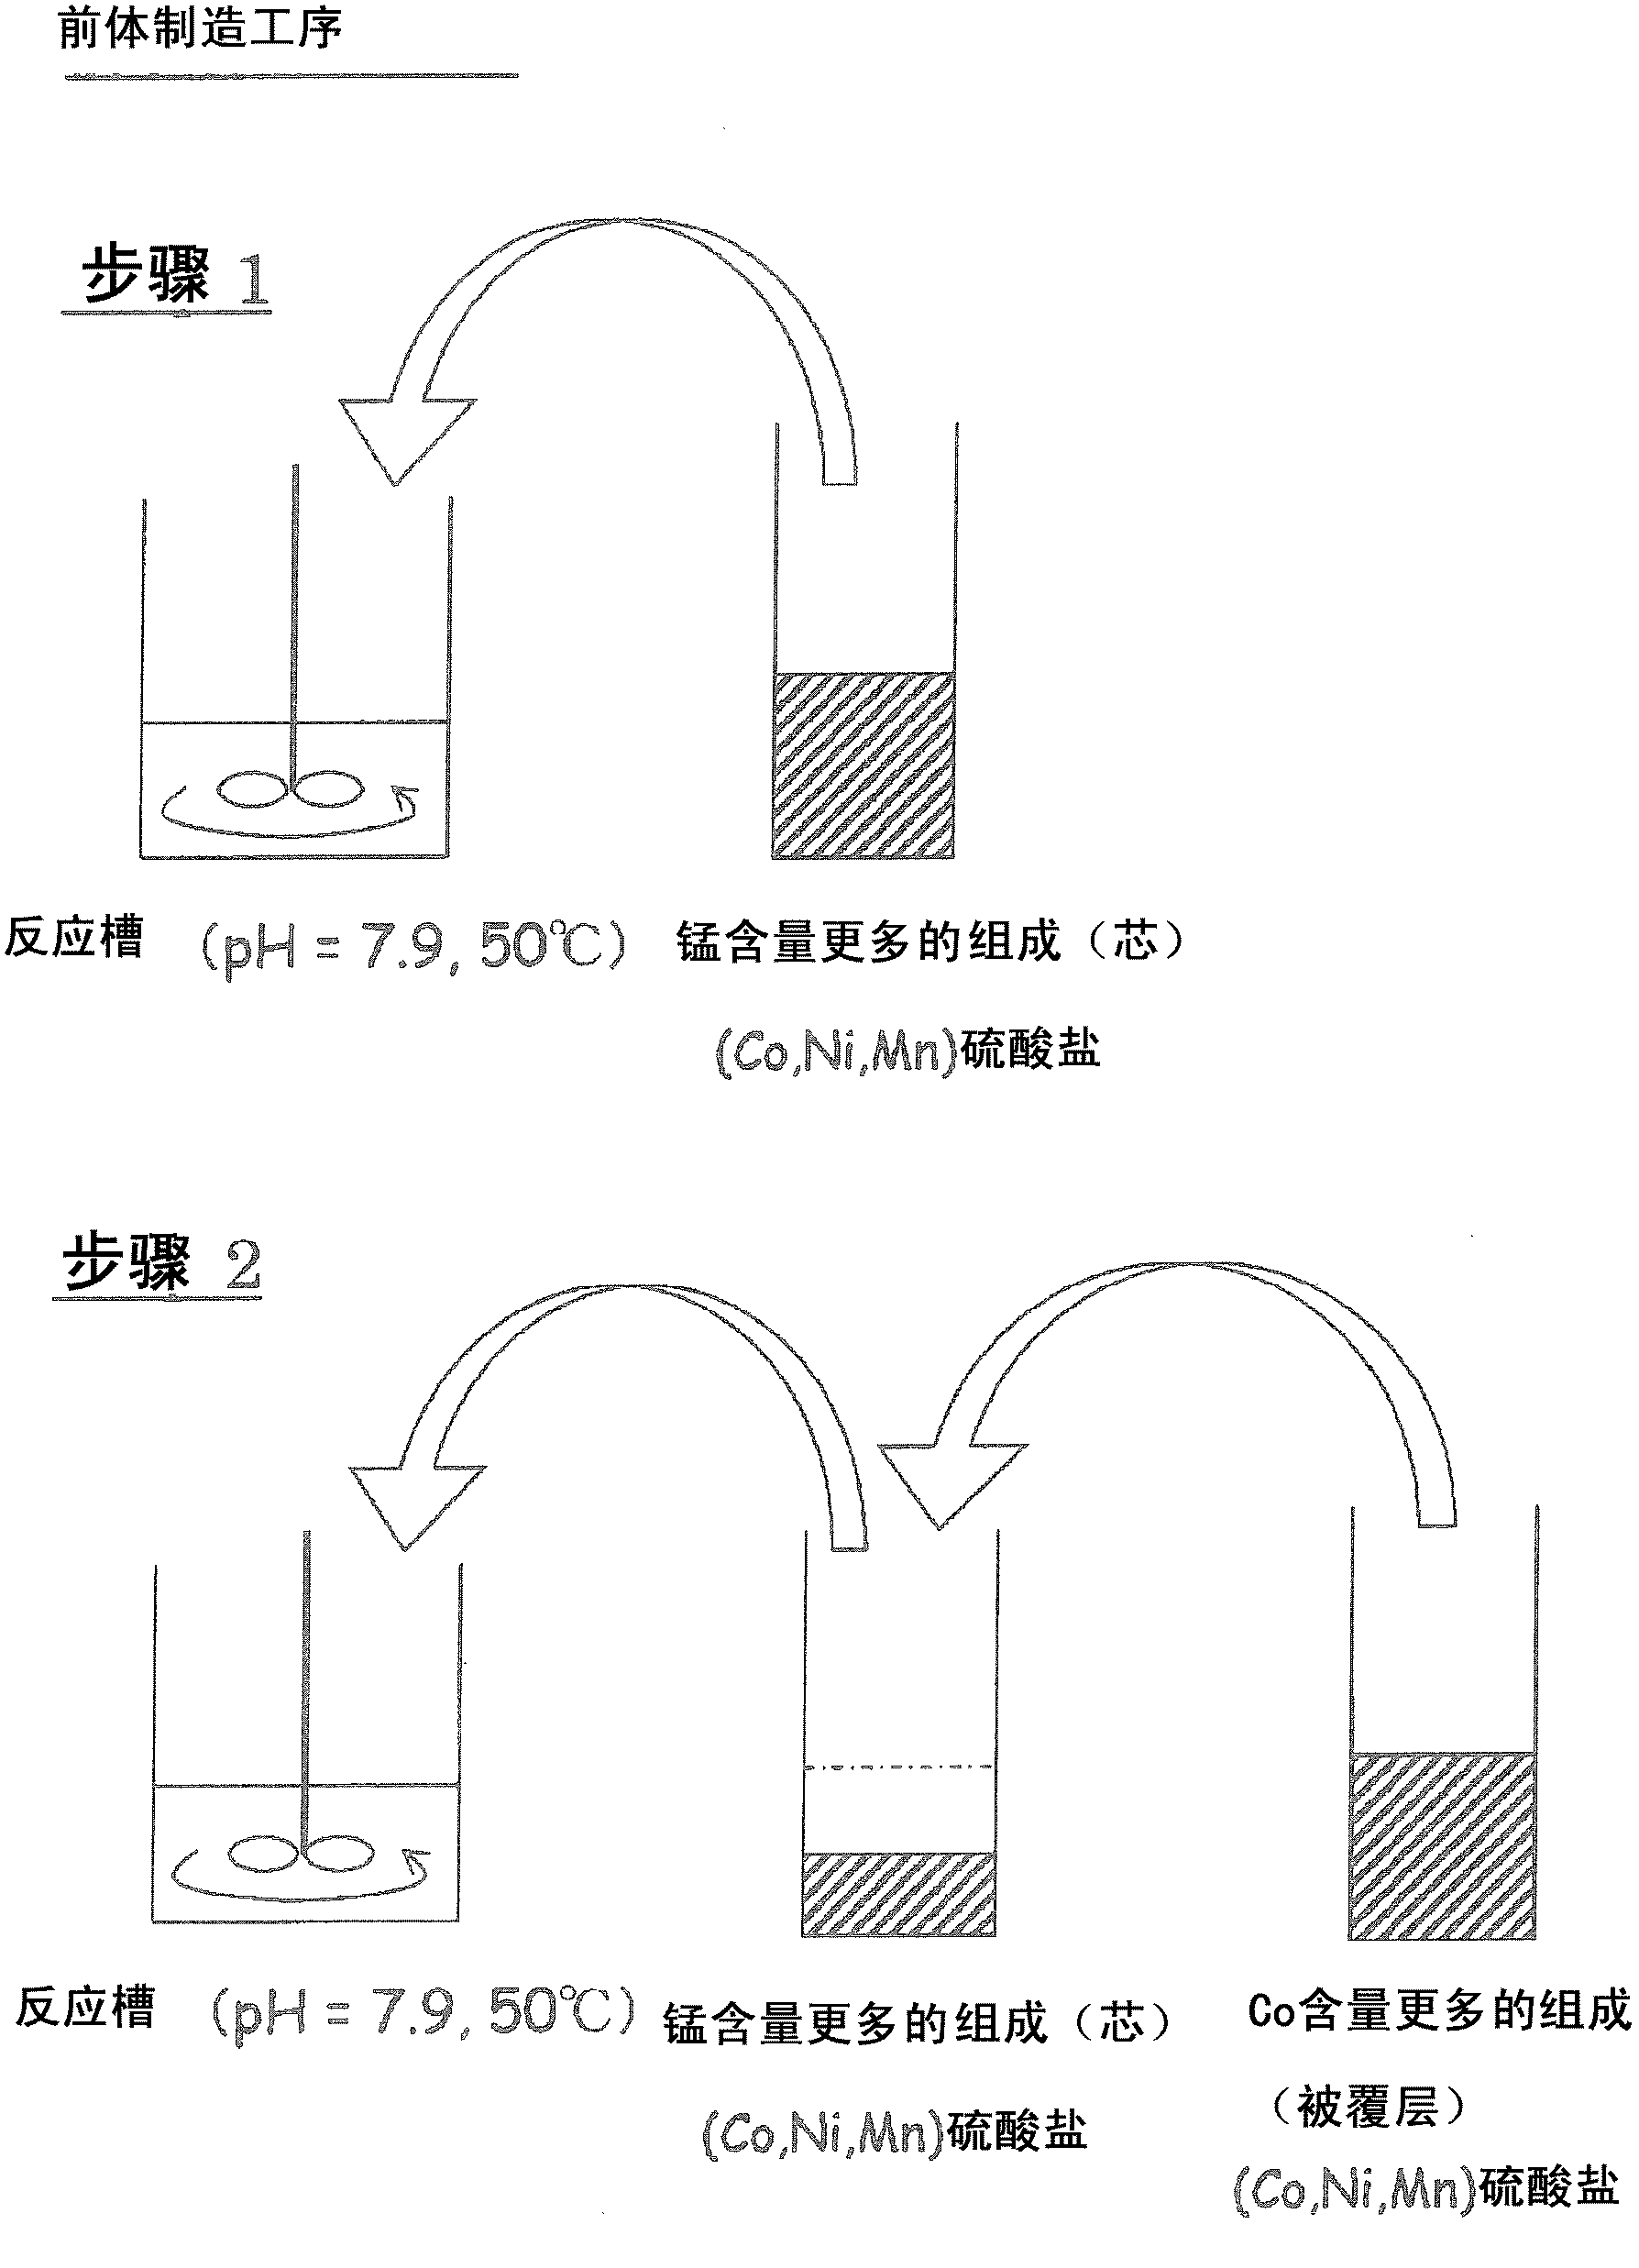 Active material for nonaqueous electrolyte secondary battery, method for production of the active material, electrode for nonaqueous electrolyte secondary battery and nonaqueous electrolyte secondary battery